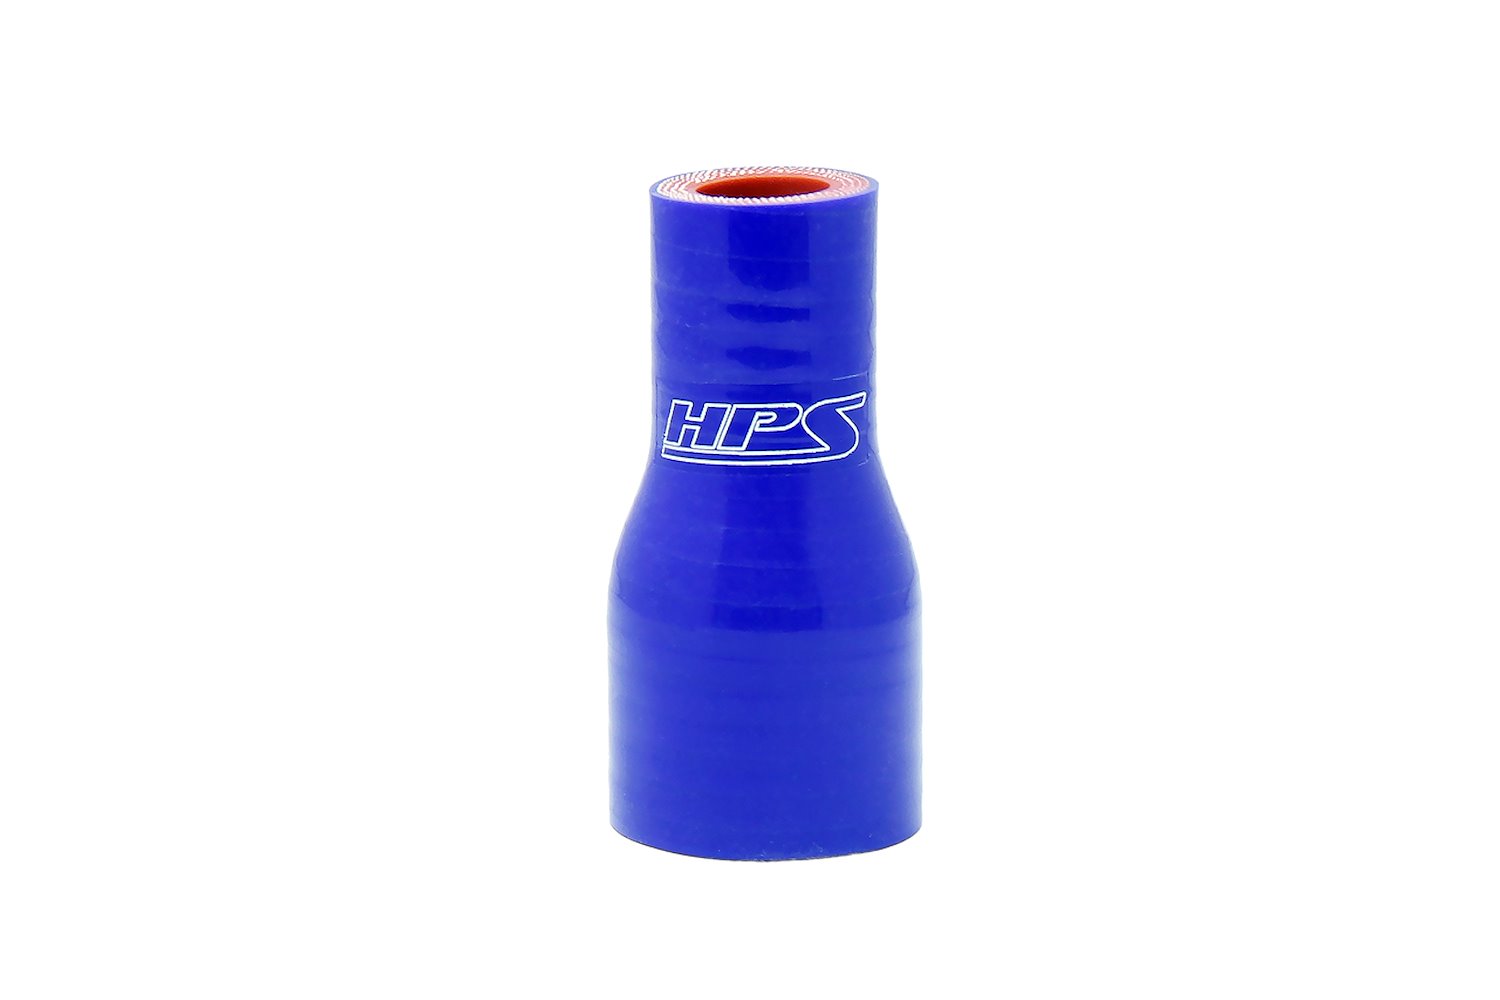 HTSR-112-187-BLUE Silicone Reducer Hose, High-Temp 4-Ply Reinforced, 1-1/8 in. - 1-7/8 in. ID, 3 in. Long, Blue